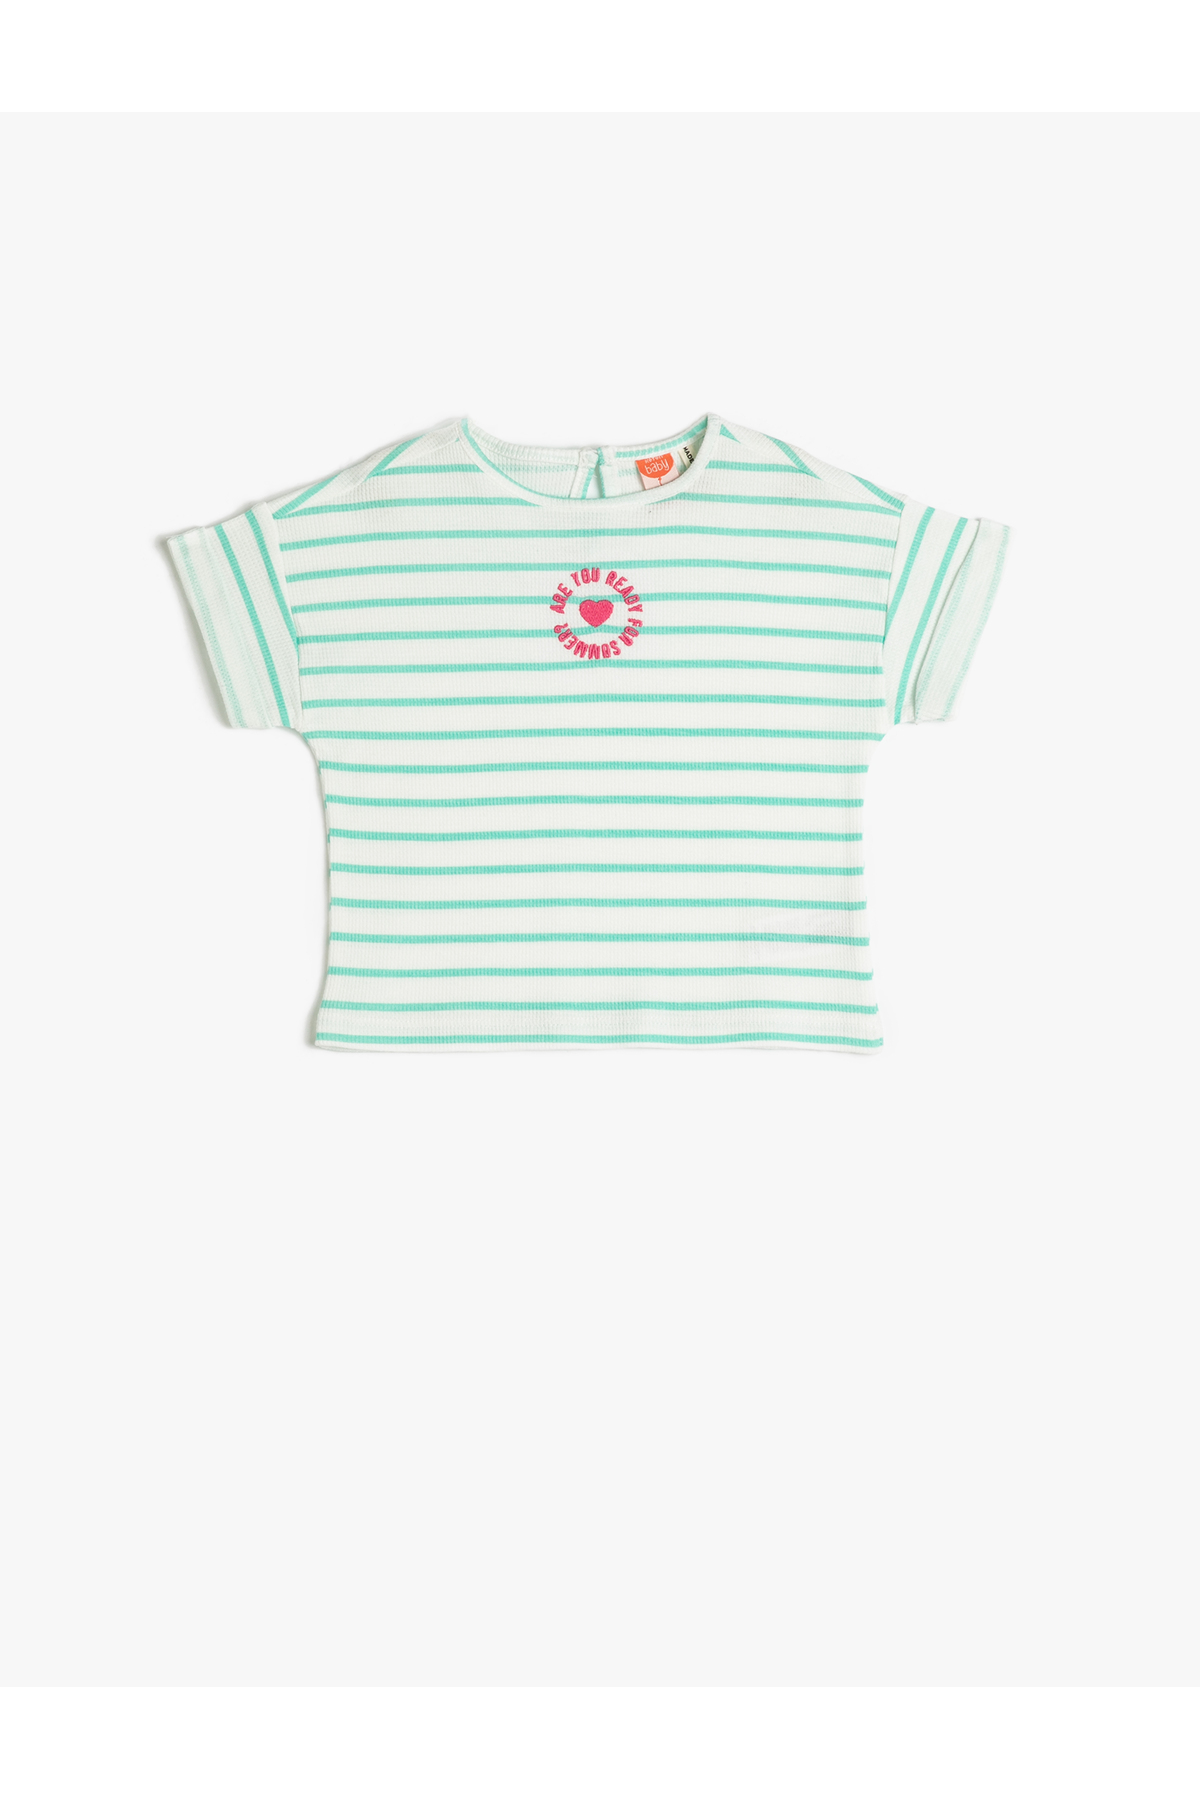 Koton Striped T-Shirt Short Sleeves Crew Neck Embroidered Detailed Cotton.